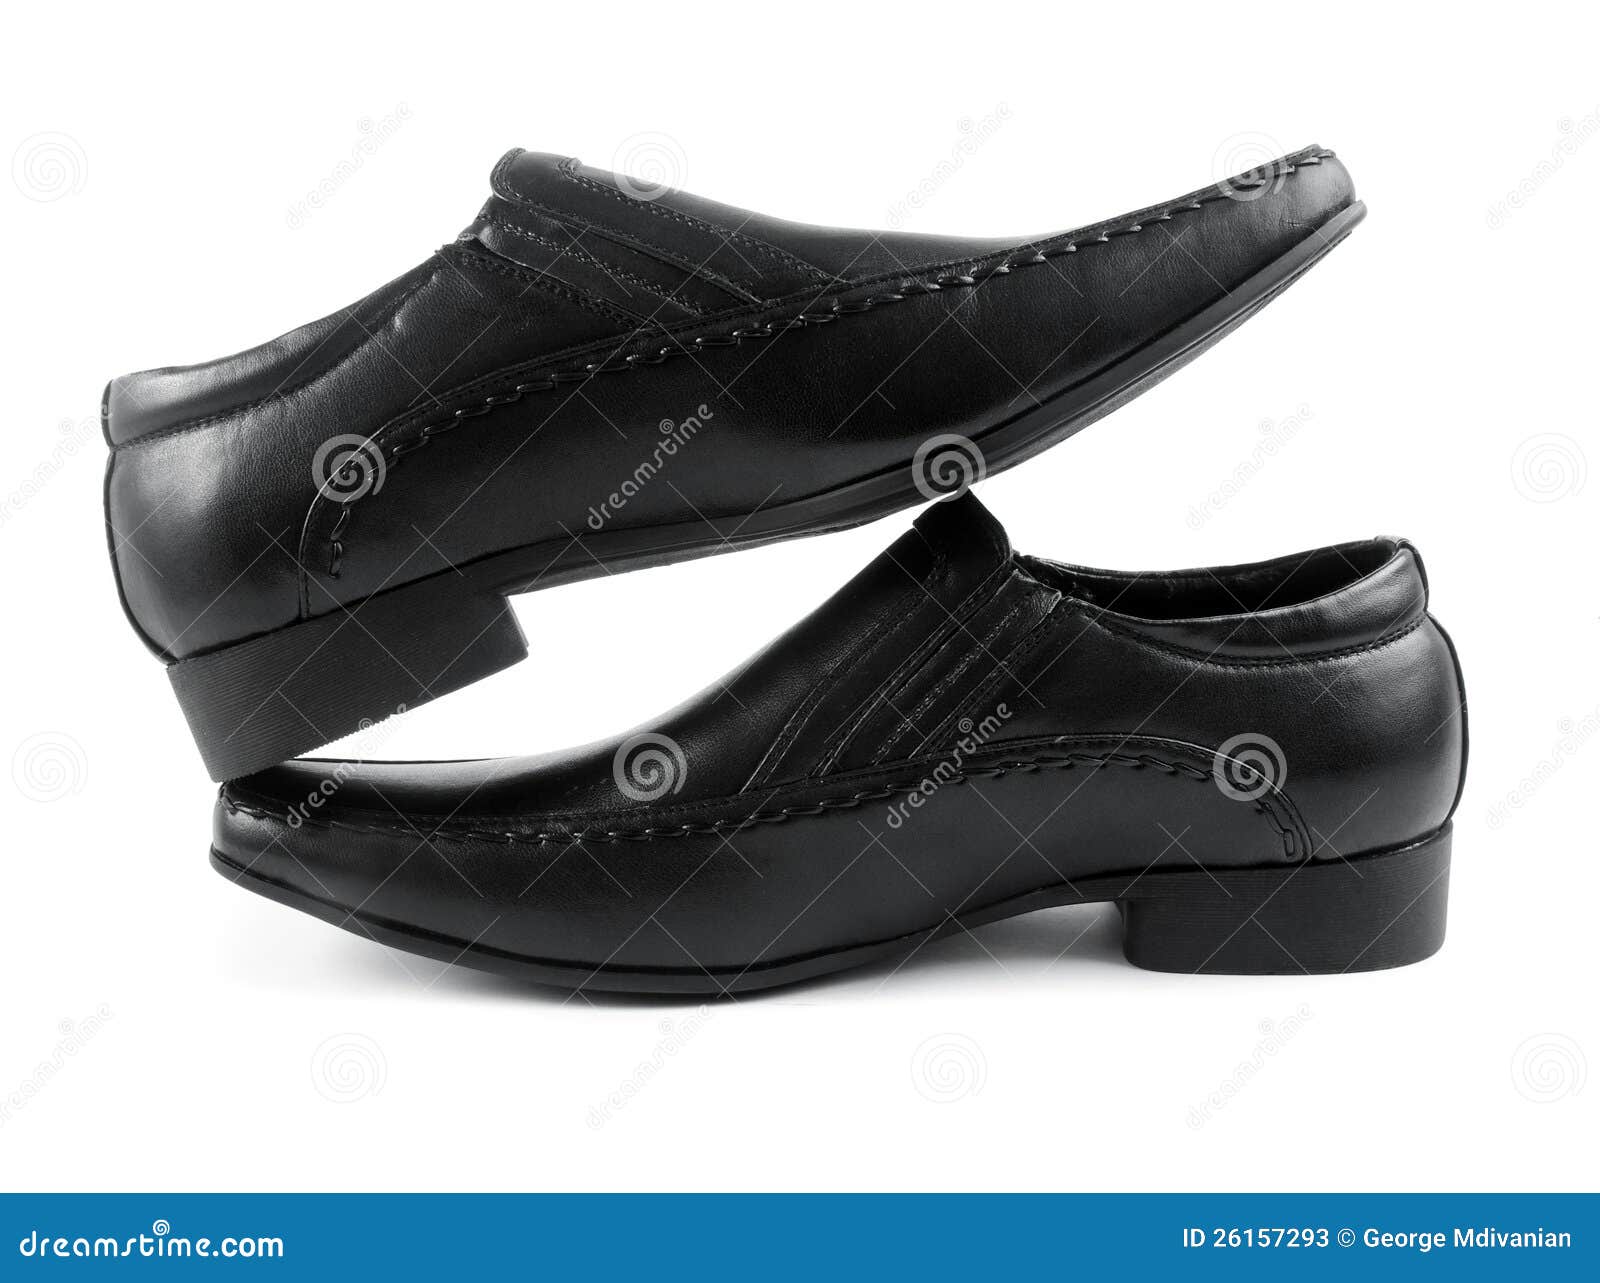 Male shoes stock image. Image of male, casual, shiny - 26157293